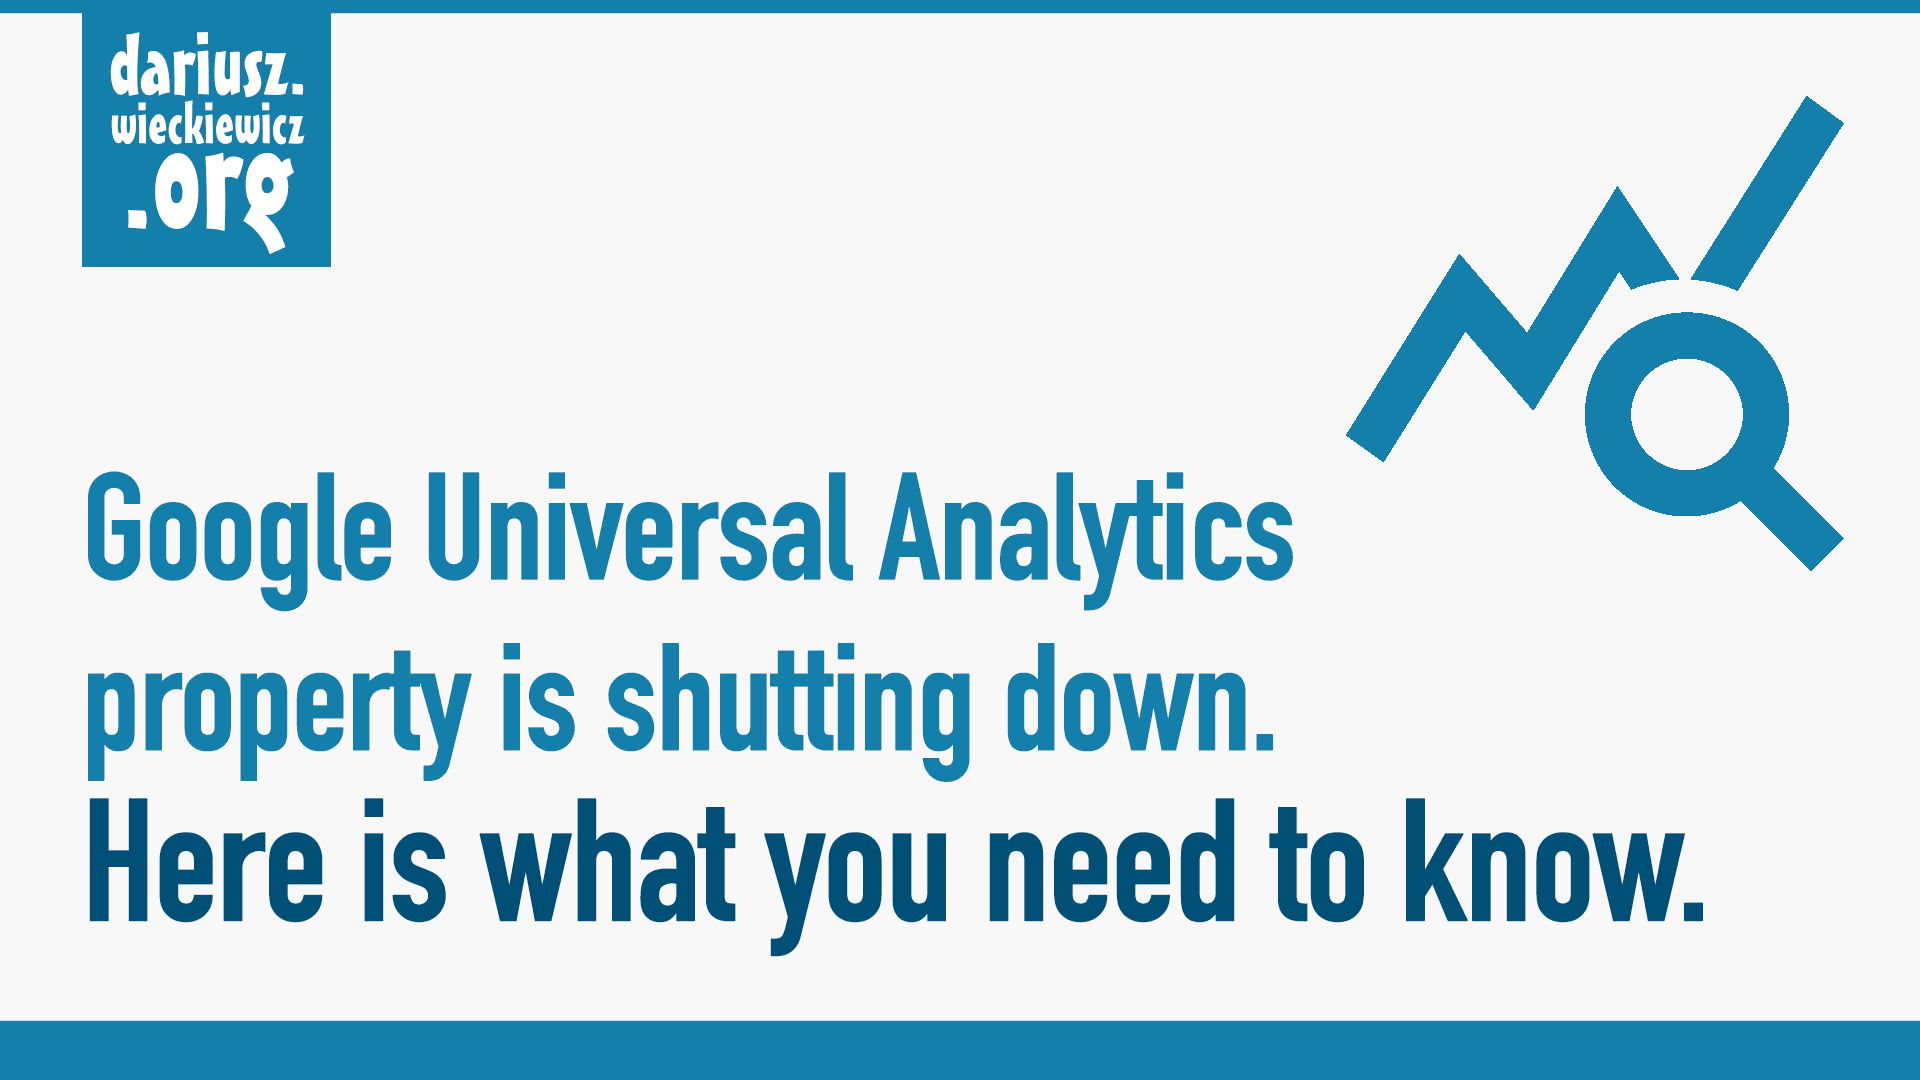 Google Universal Analytics property is shutting down. Here is what you need to know.